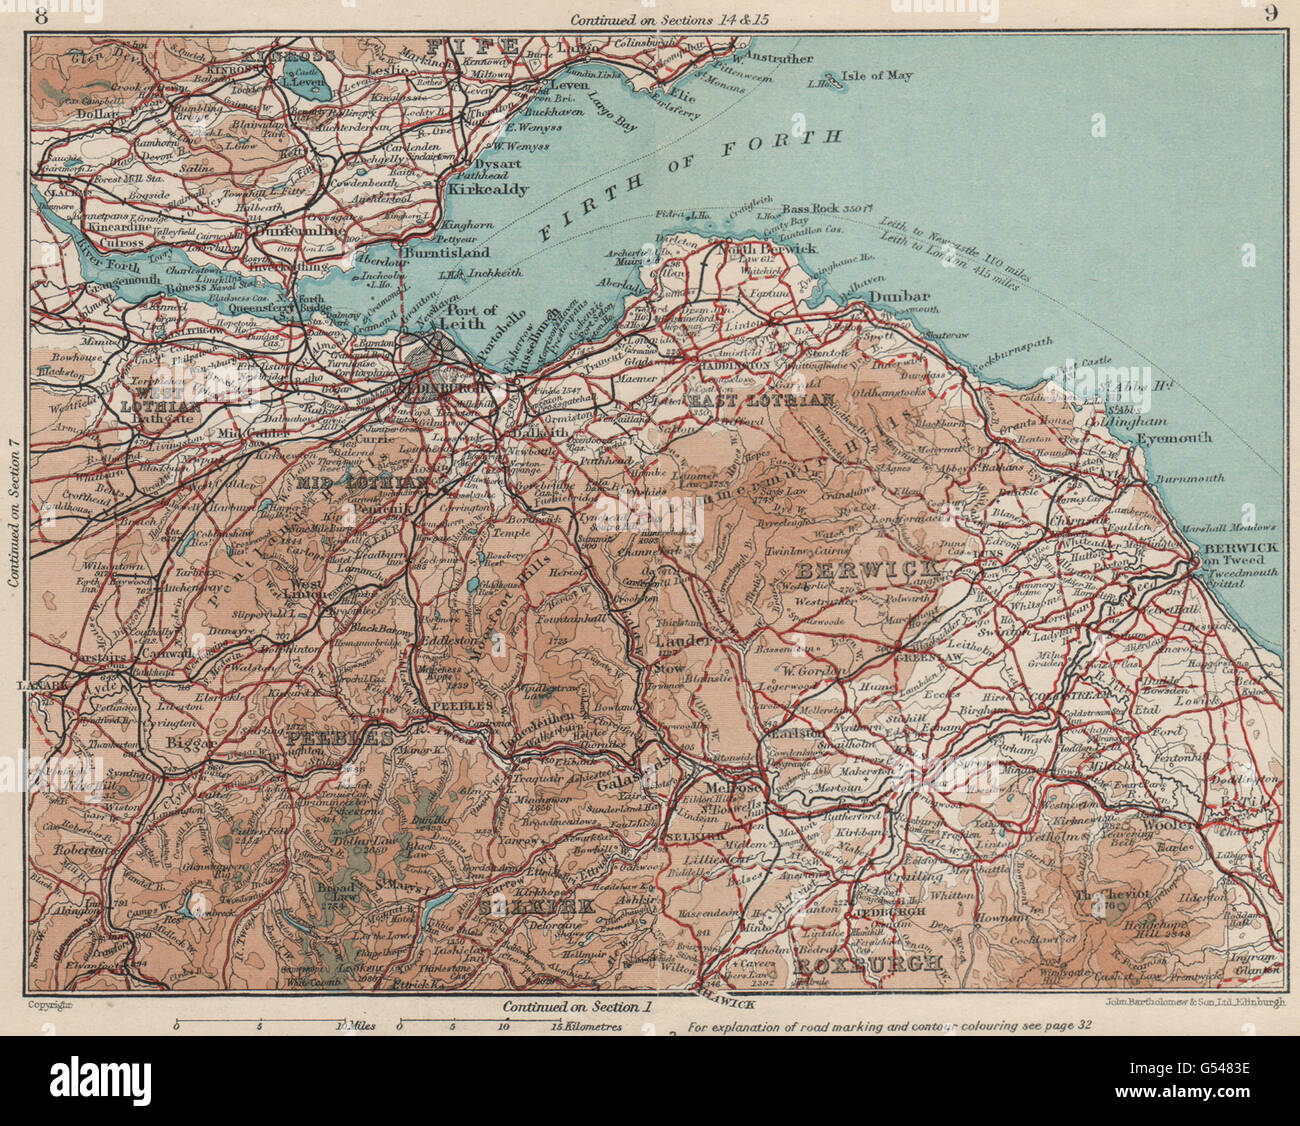 SCOTLAND SOUTH EAST. Firth of Forth Fife Lothian Borders Berwick, 1932 old map Stock Photo